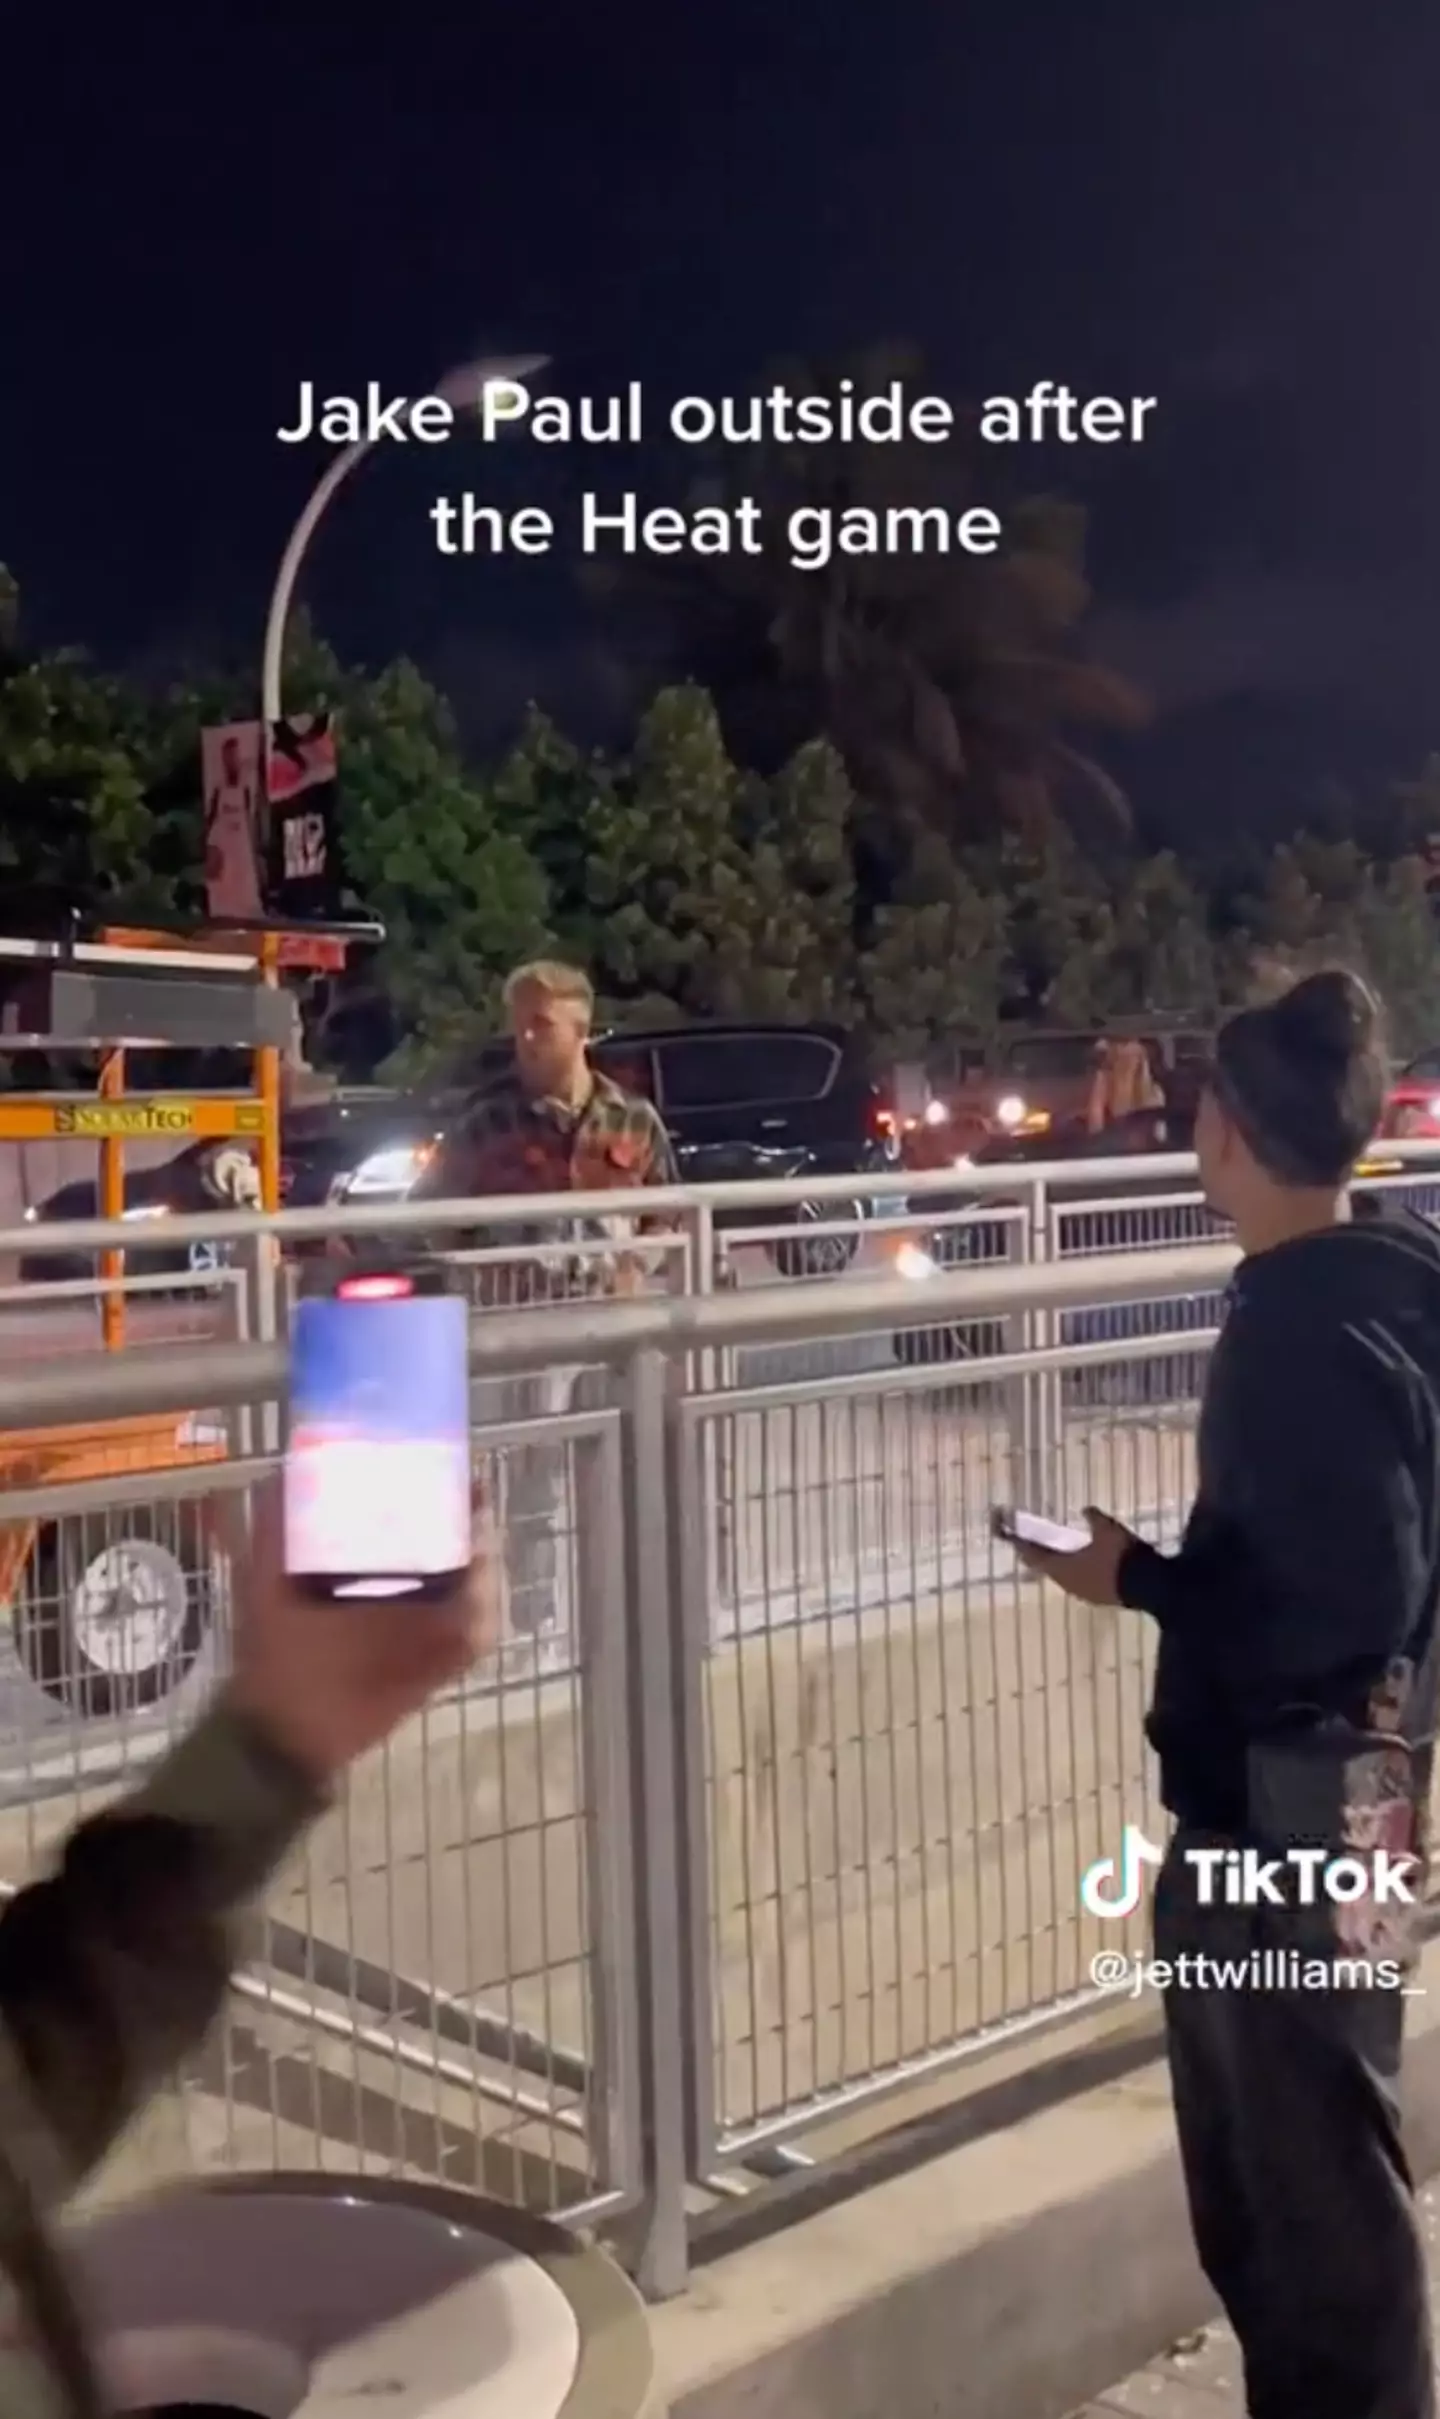 Jake Paul outside the Miami Heat game, where he claims to have been jumped by Mayweather.